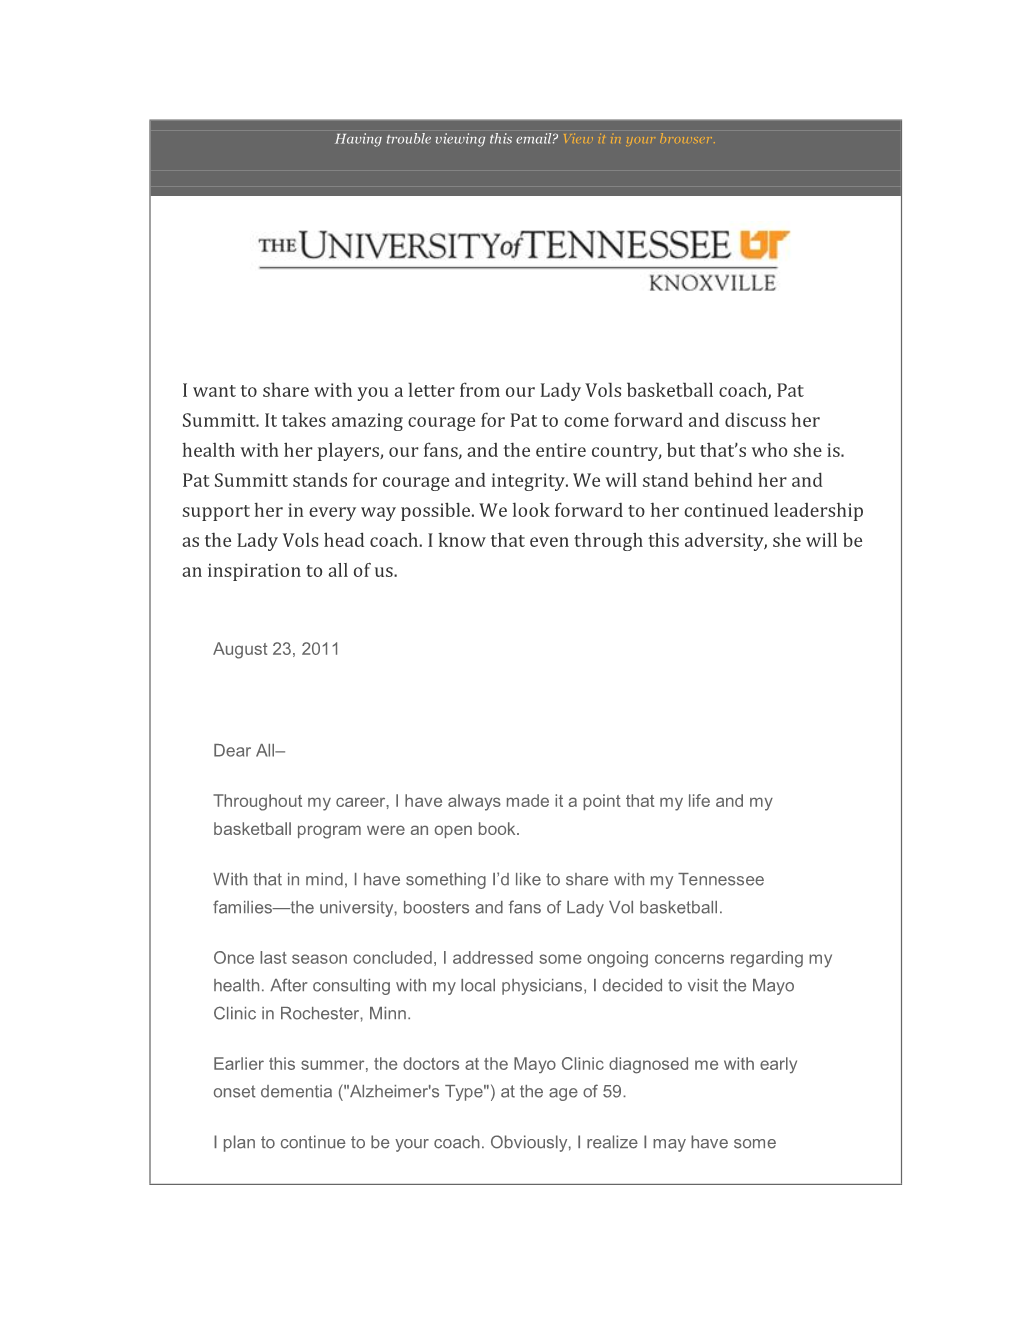 I Want to Share with You a Letter from Our Lady Vols Basketball Coach, Pat Summitt